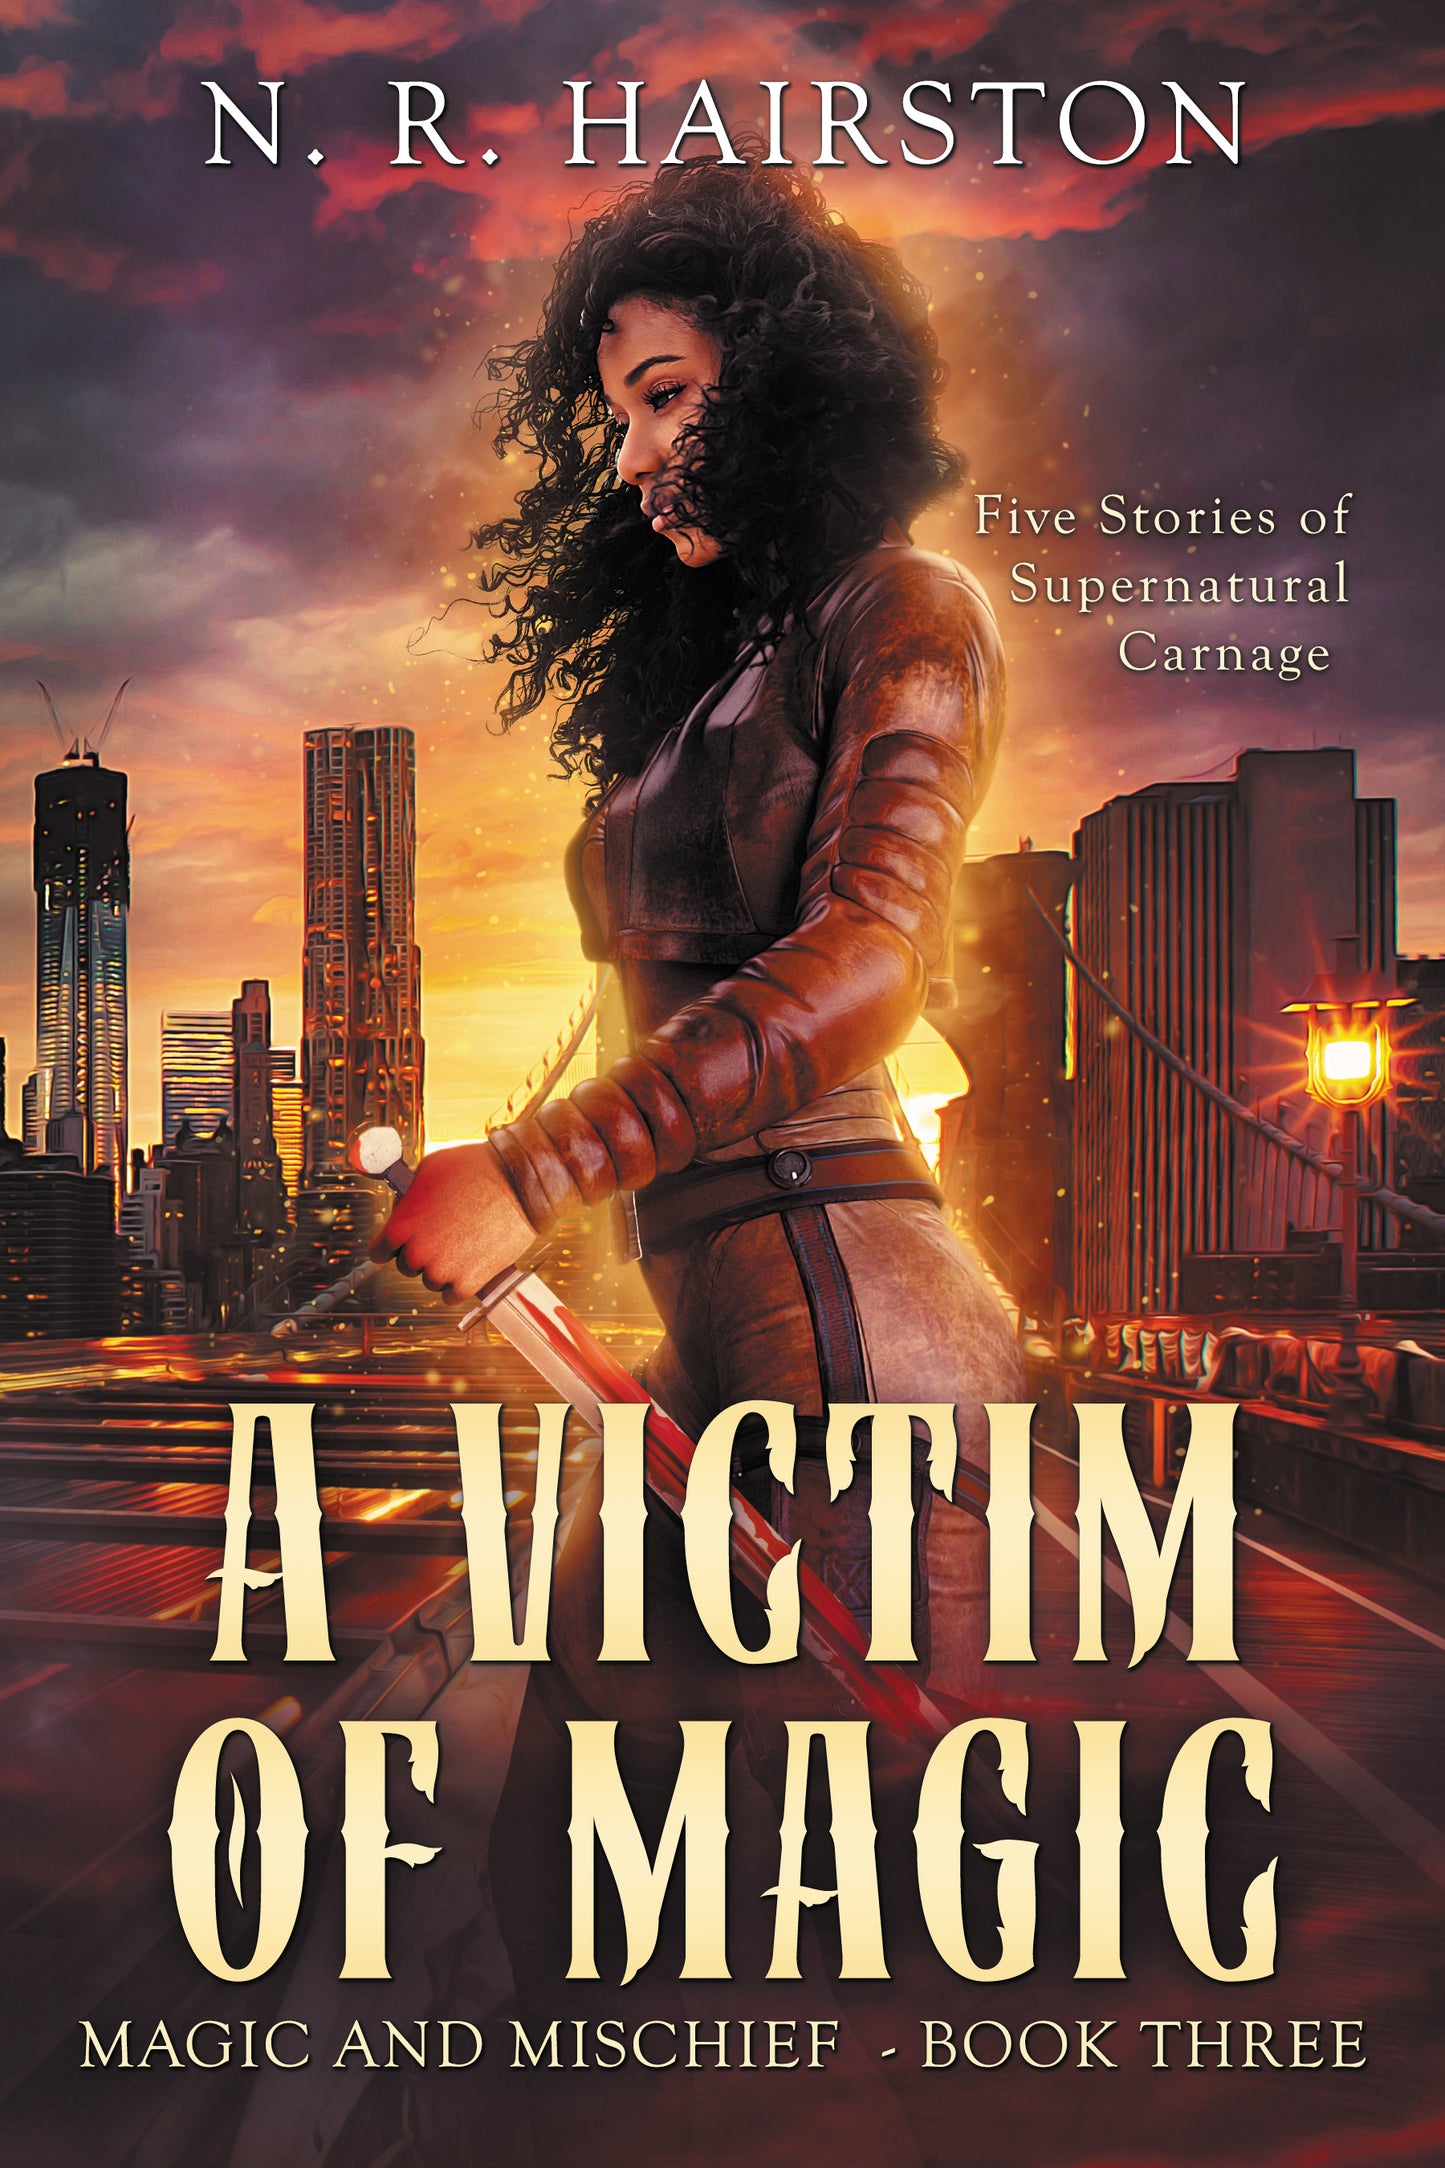 A Victim of Magic: Five Stories of Supernatural Carnage (Magic and Mischief Book 3) Paperback